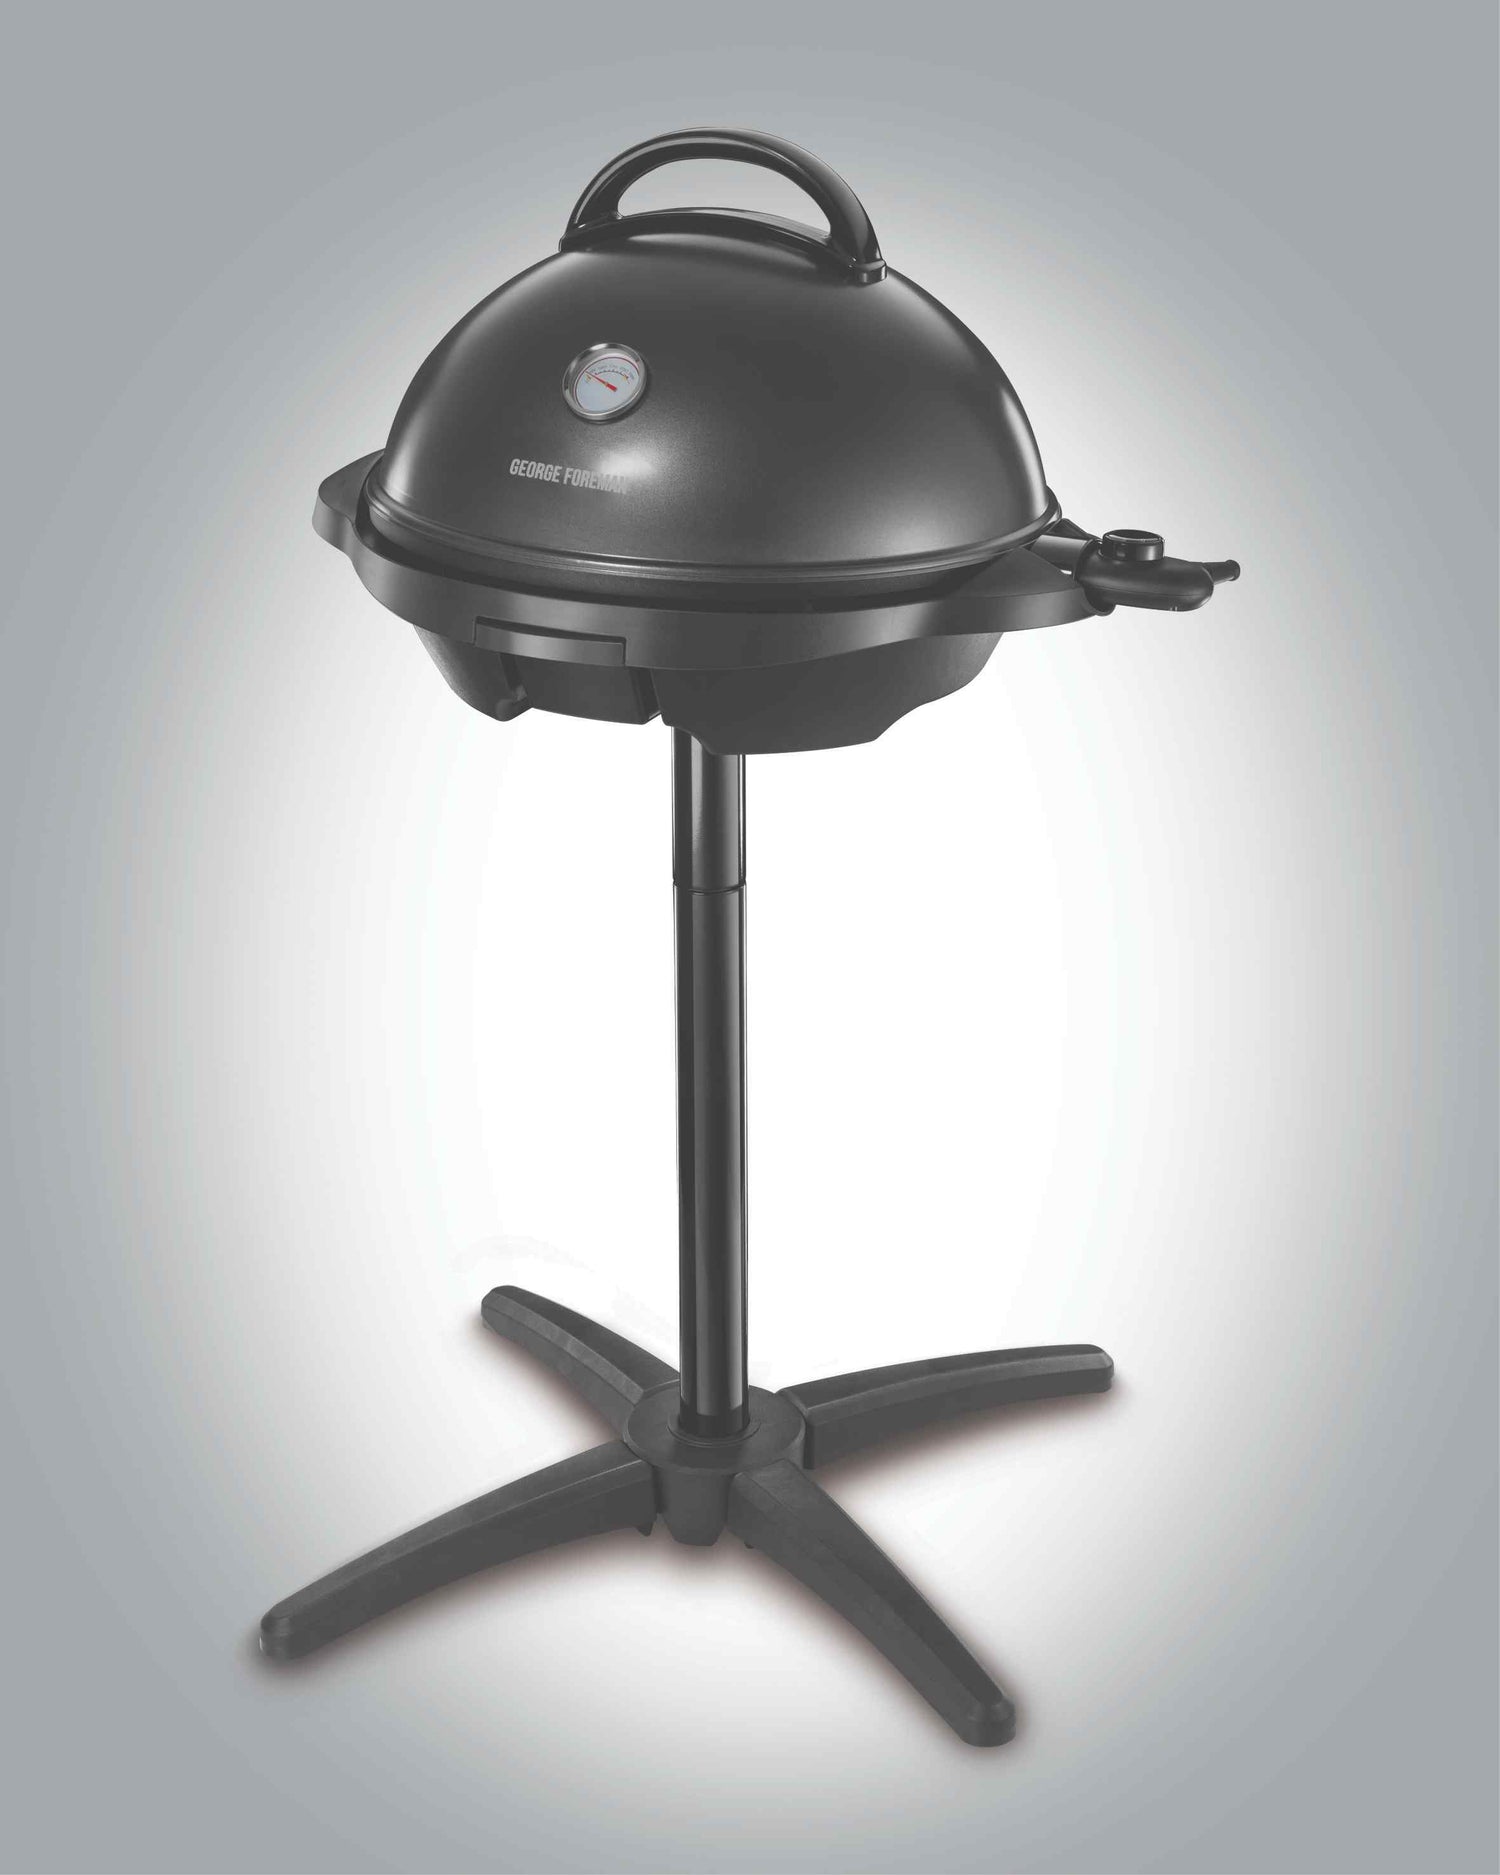 George Foreman Indoor Outdoor Bbq Grill - Black 1 Shaws Department Stores